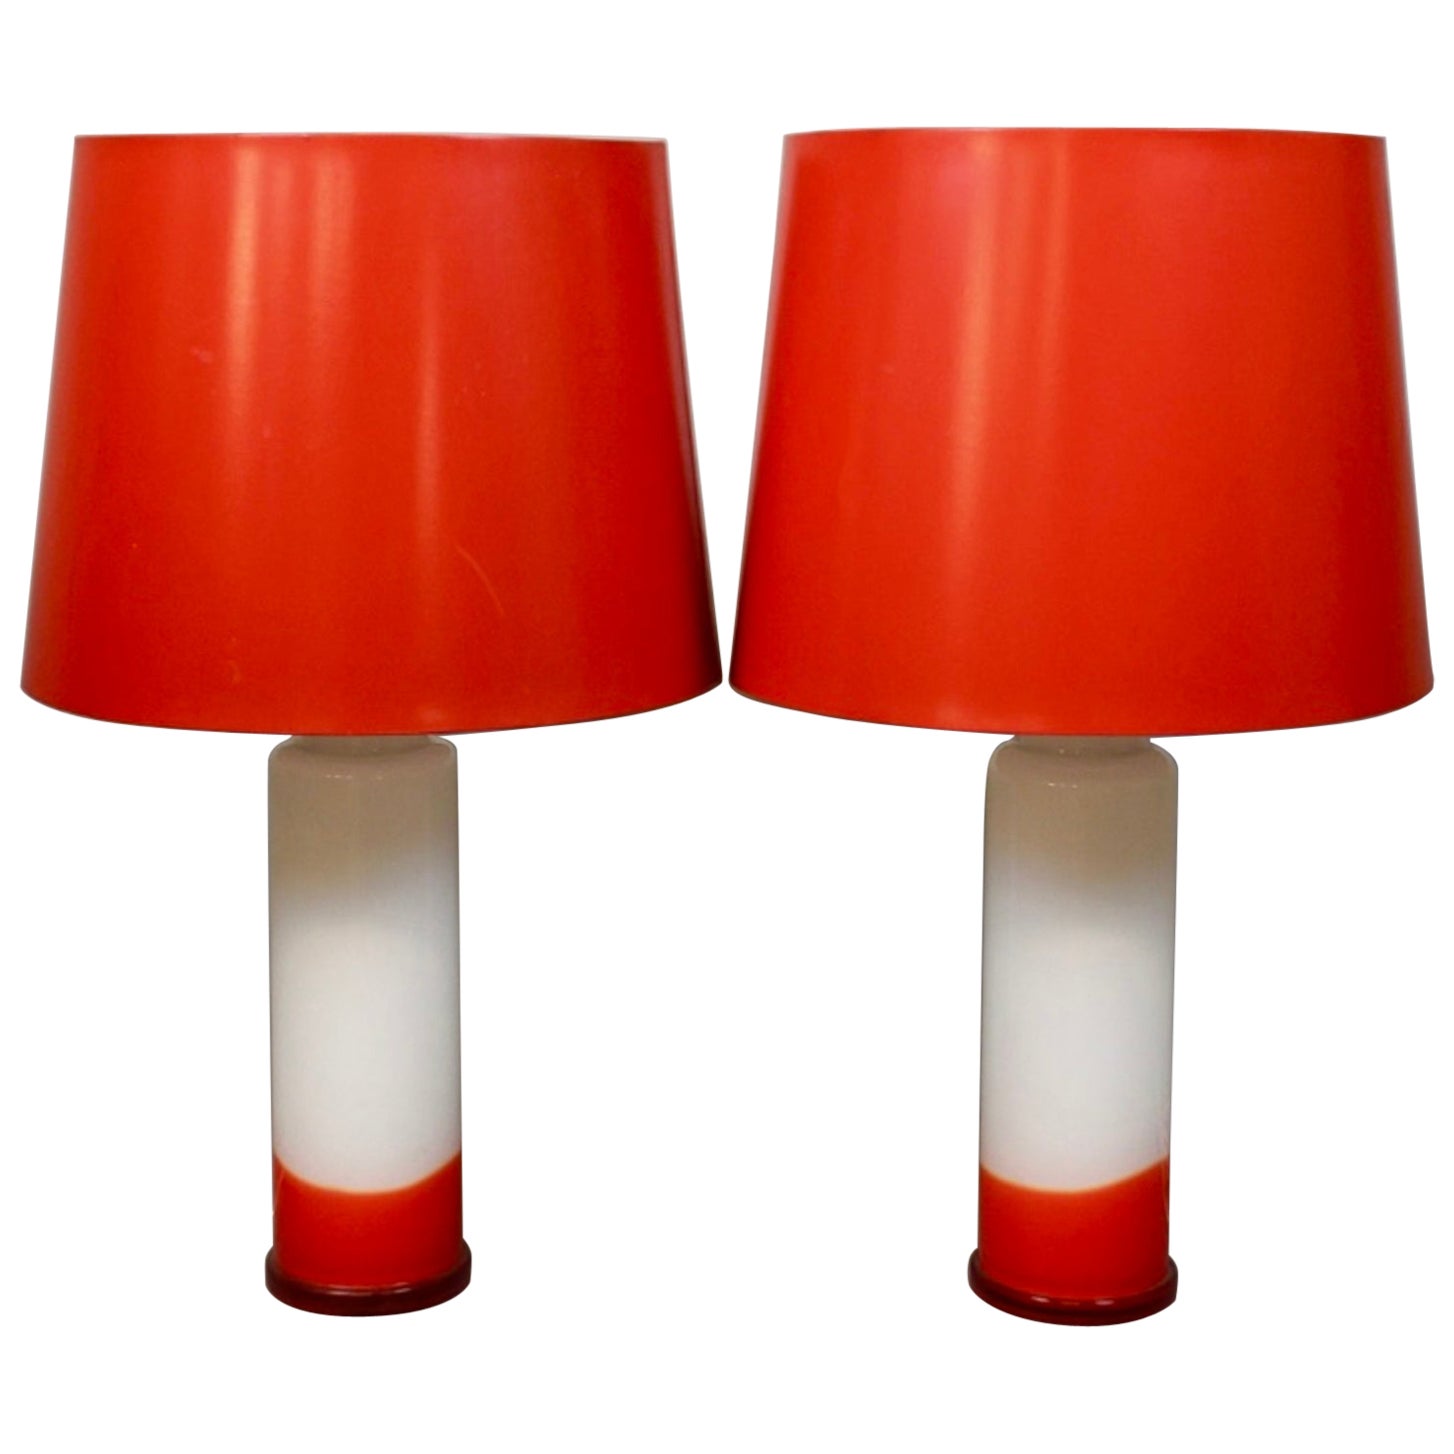 Pair of Whithe and Red Swedish Luxus Glass Table Lamps For Sale